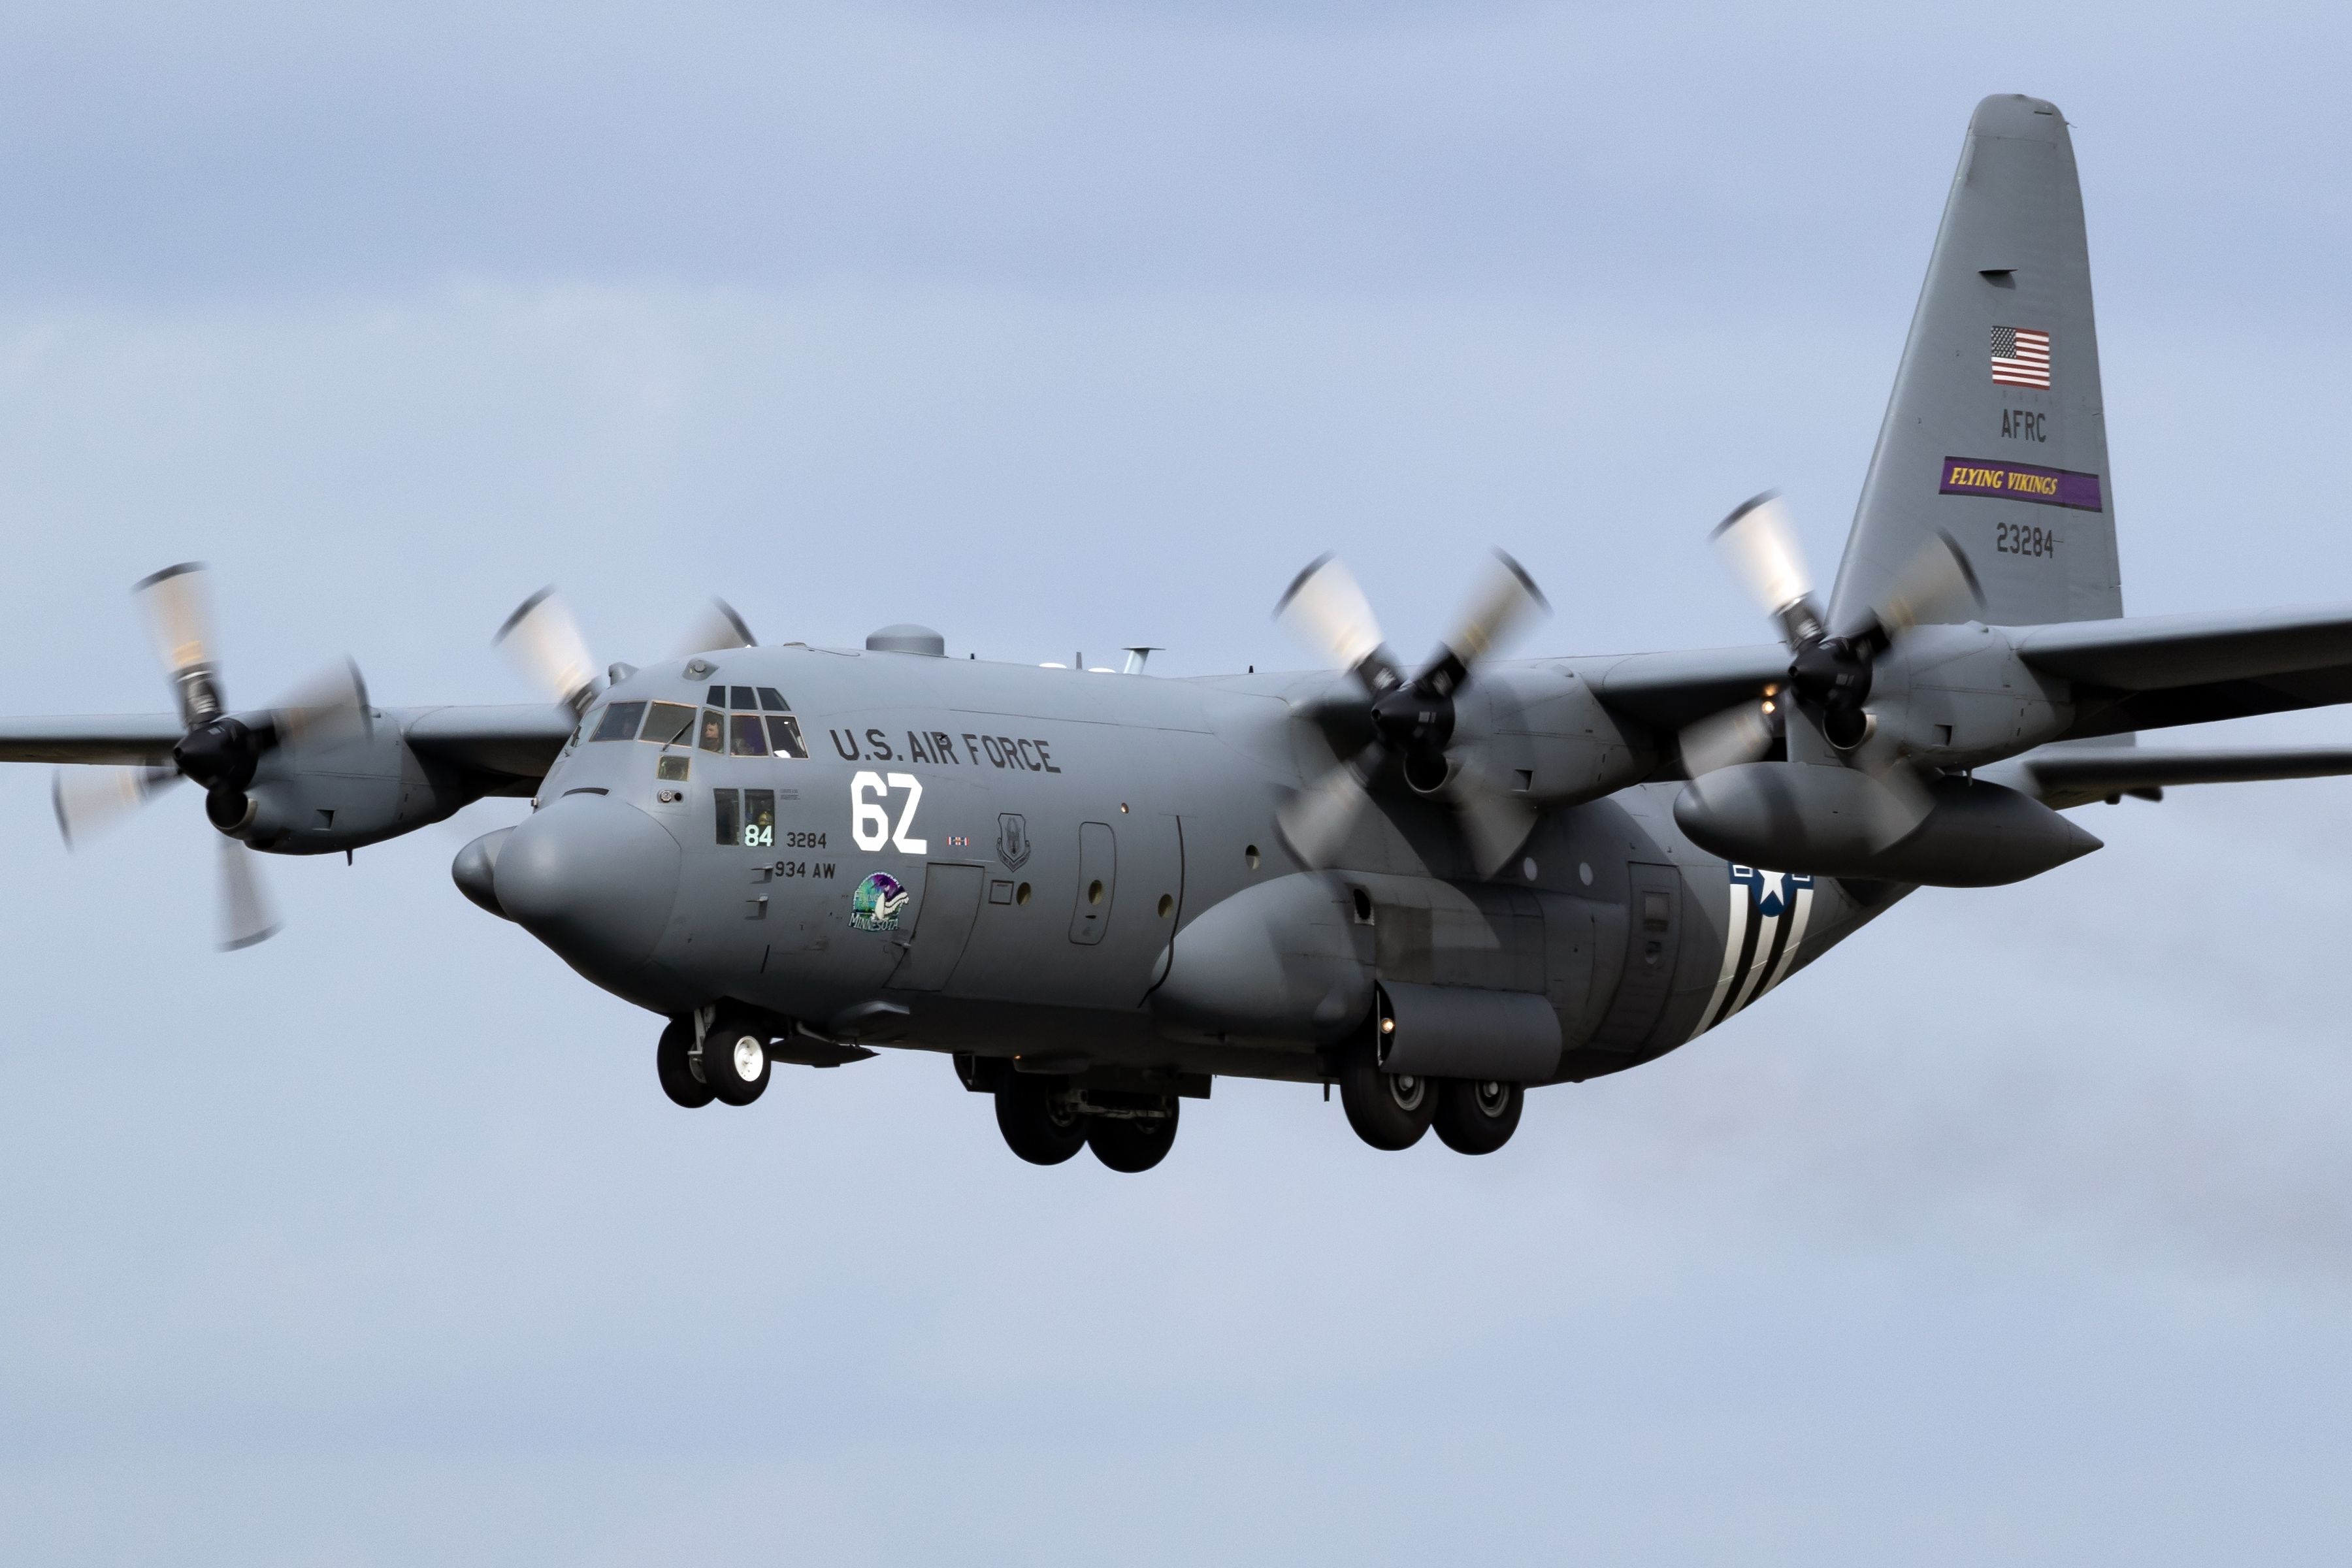 A US Air Force Lockheed C-130H Hercules from the 934th Airlift Wing from Minnesota flying in the sky.